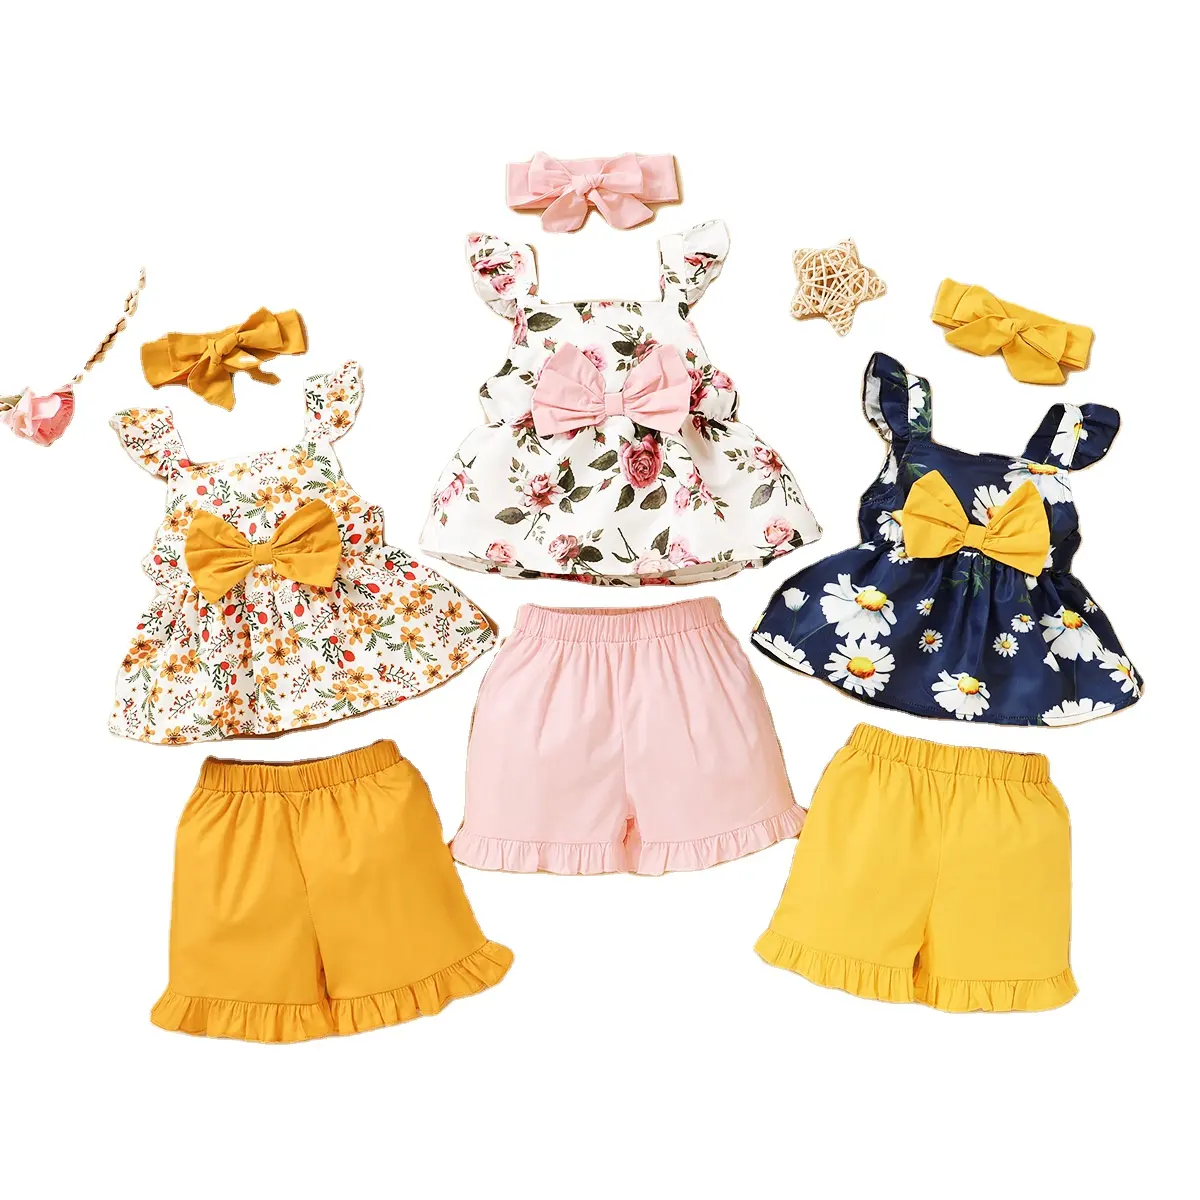 2021 Fashion Cute Toddler Baby Clothing Summer Girls Clothes Sets Floral Tops T-Shirts Shorts Pants Kids Outfits